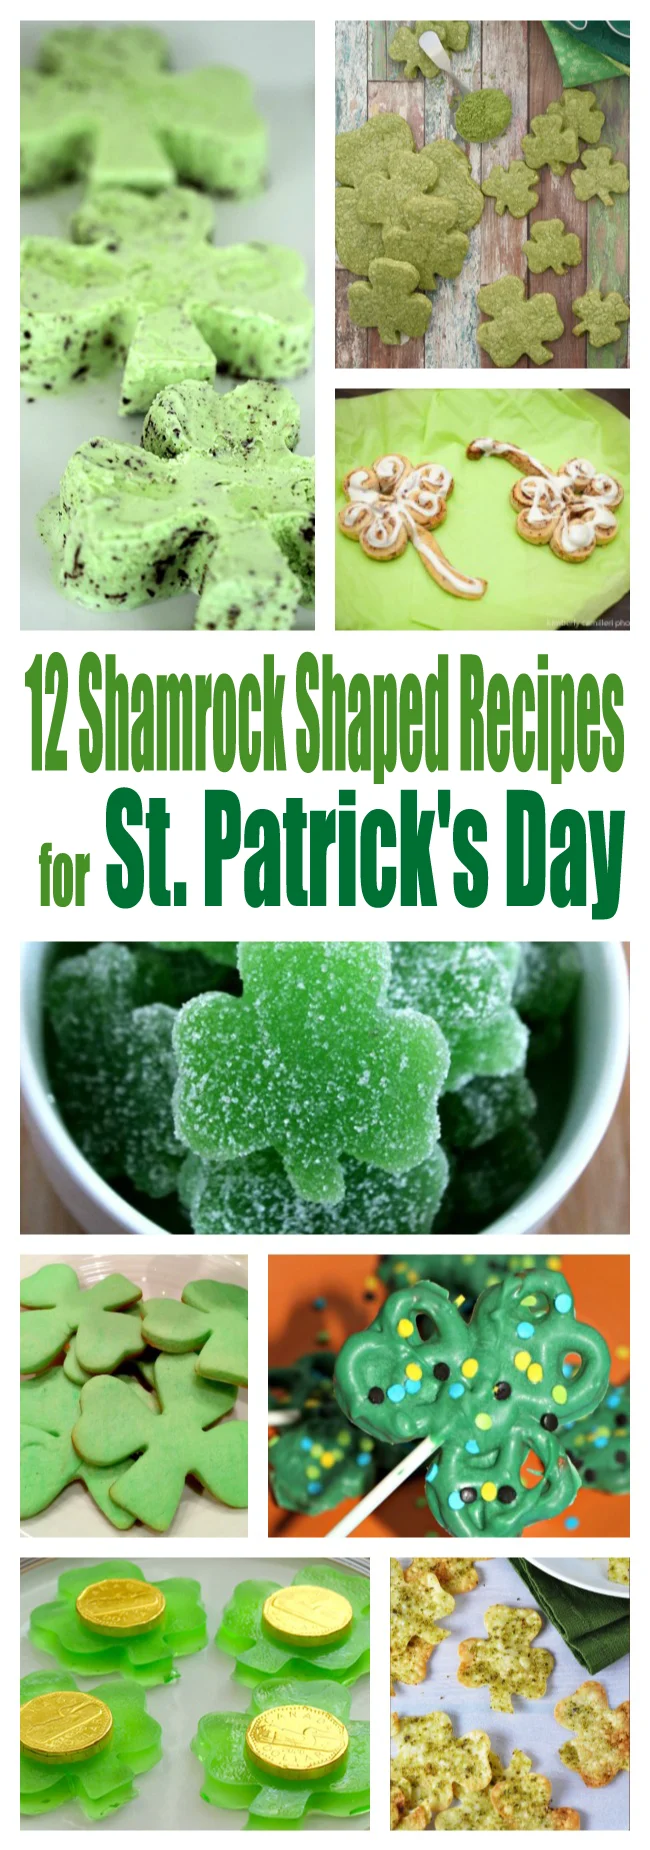 Okay now these are CUTE. Love these shamrock shaped ideas for St. Patrick's Day. Recipes galore.